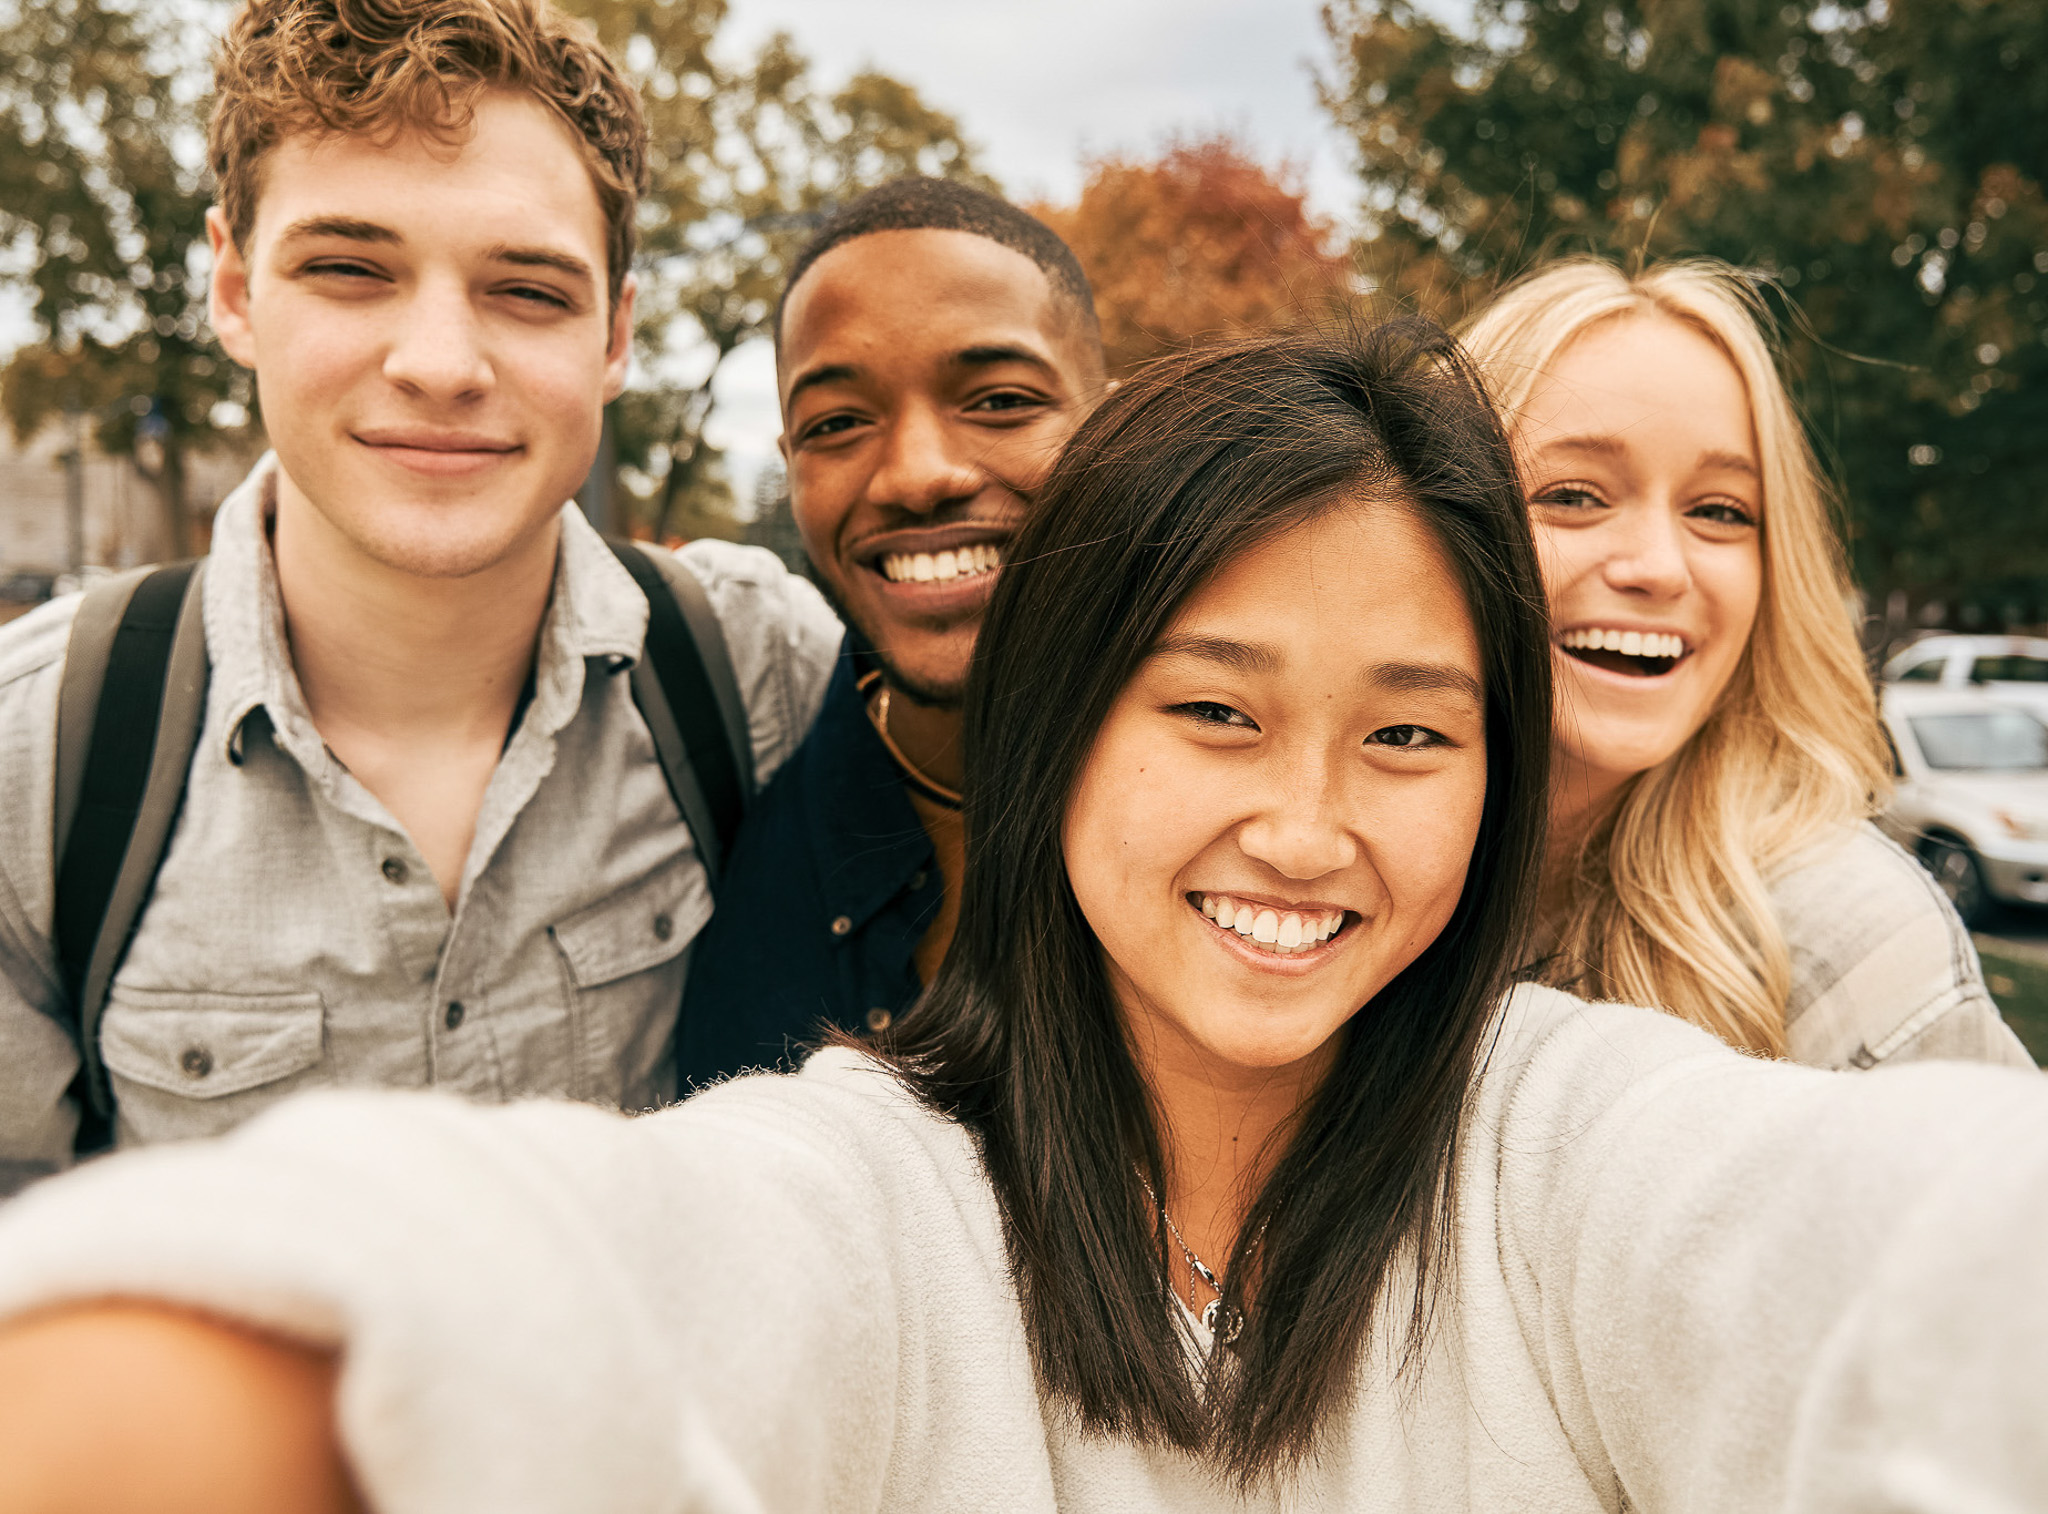 Selfie of a group of students on campus